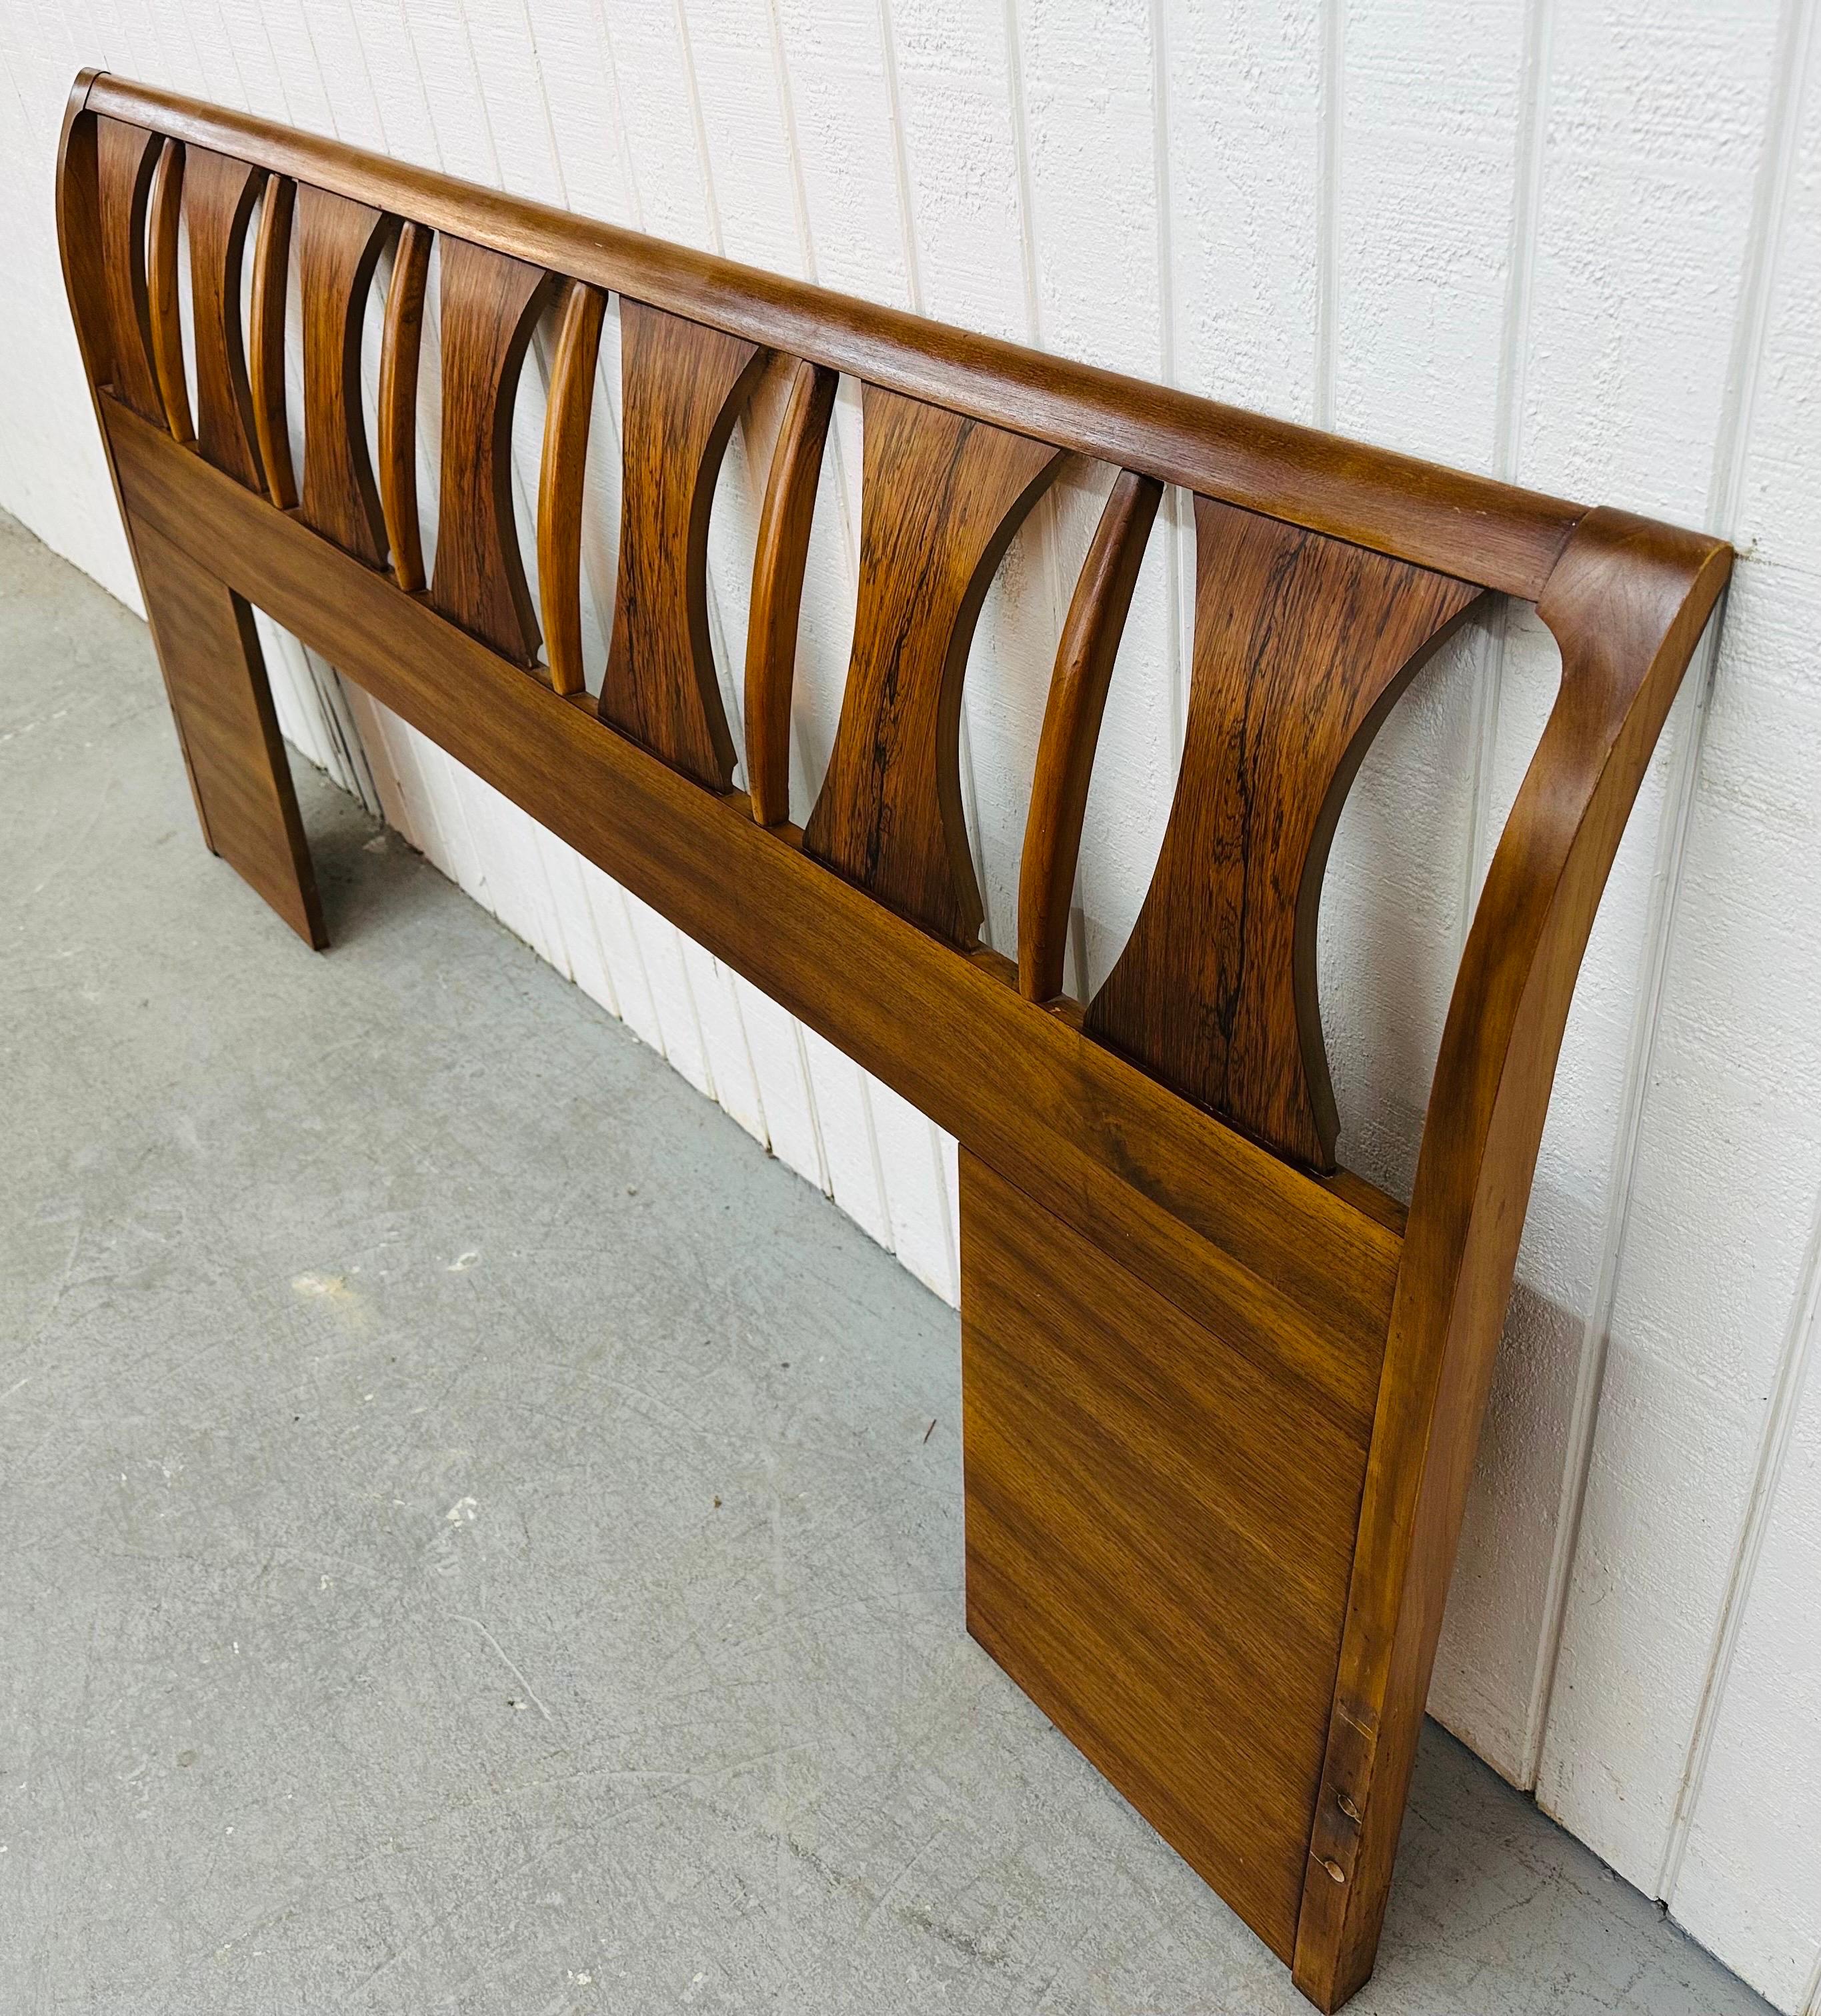 This listing is for a Mid-Century Modern Kent Coffey Perspecta Walnut & Rosewood King Headboard. Featuring a straight line design, seven sculpted rosewood panels, and a beautiful walnut finish. This is an exceptional combination of quality and